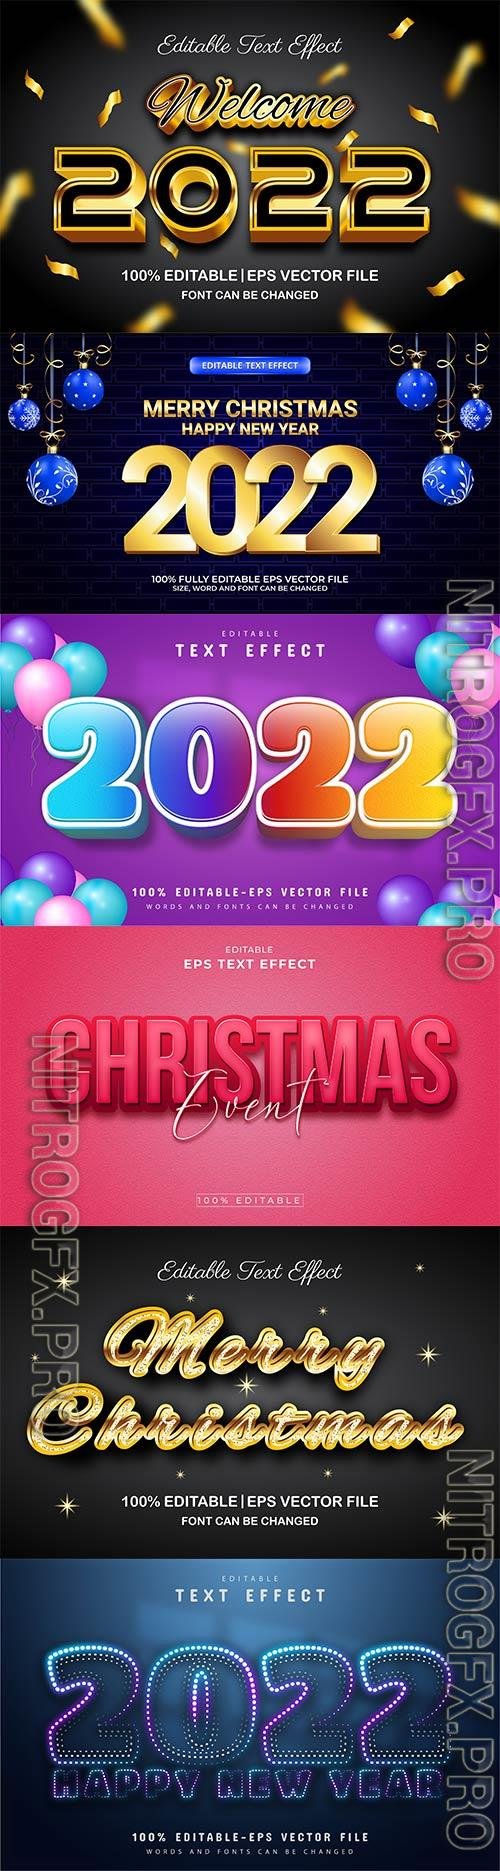 Merry christmas and happy new year 2022 editable vector text effects vol 7